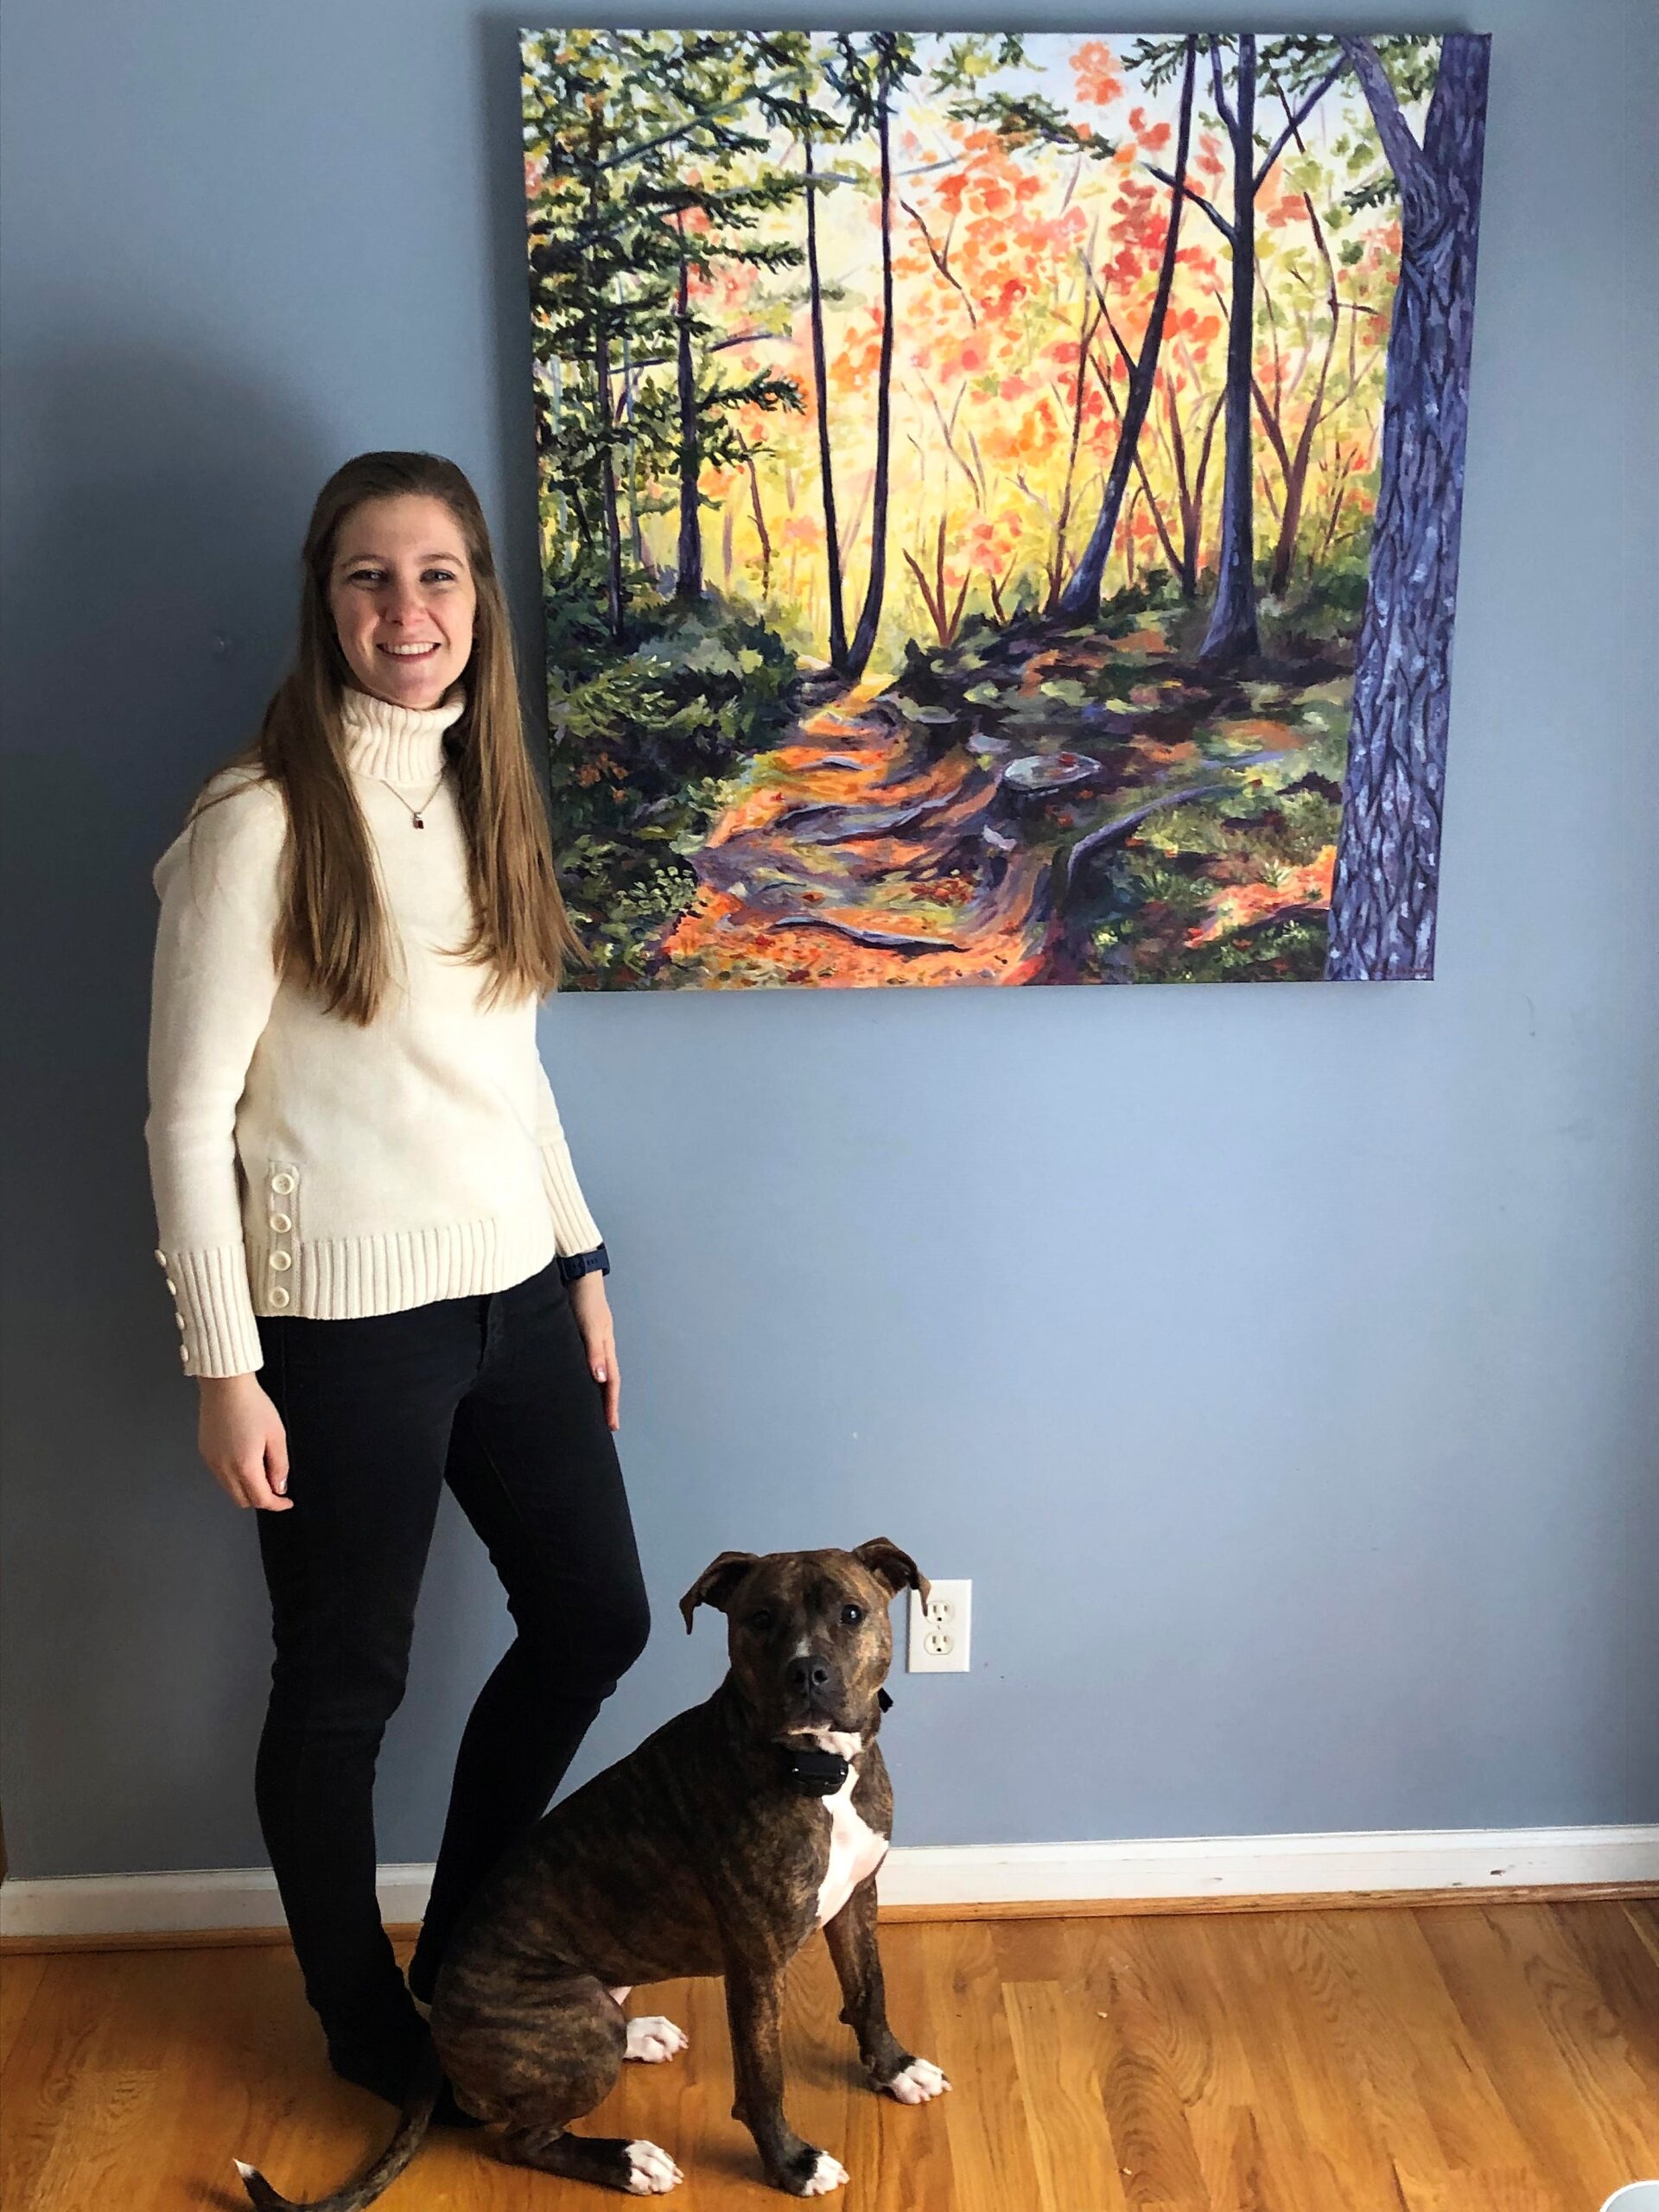 Mary Haapala in front of her painting with her dog